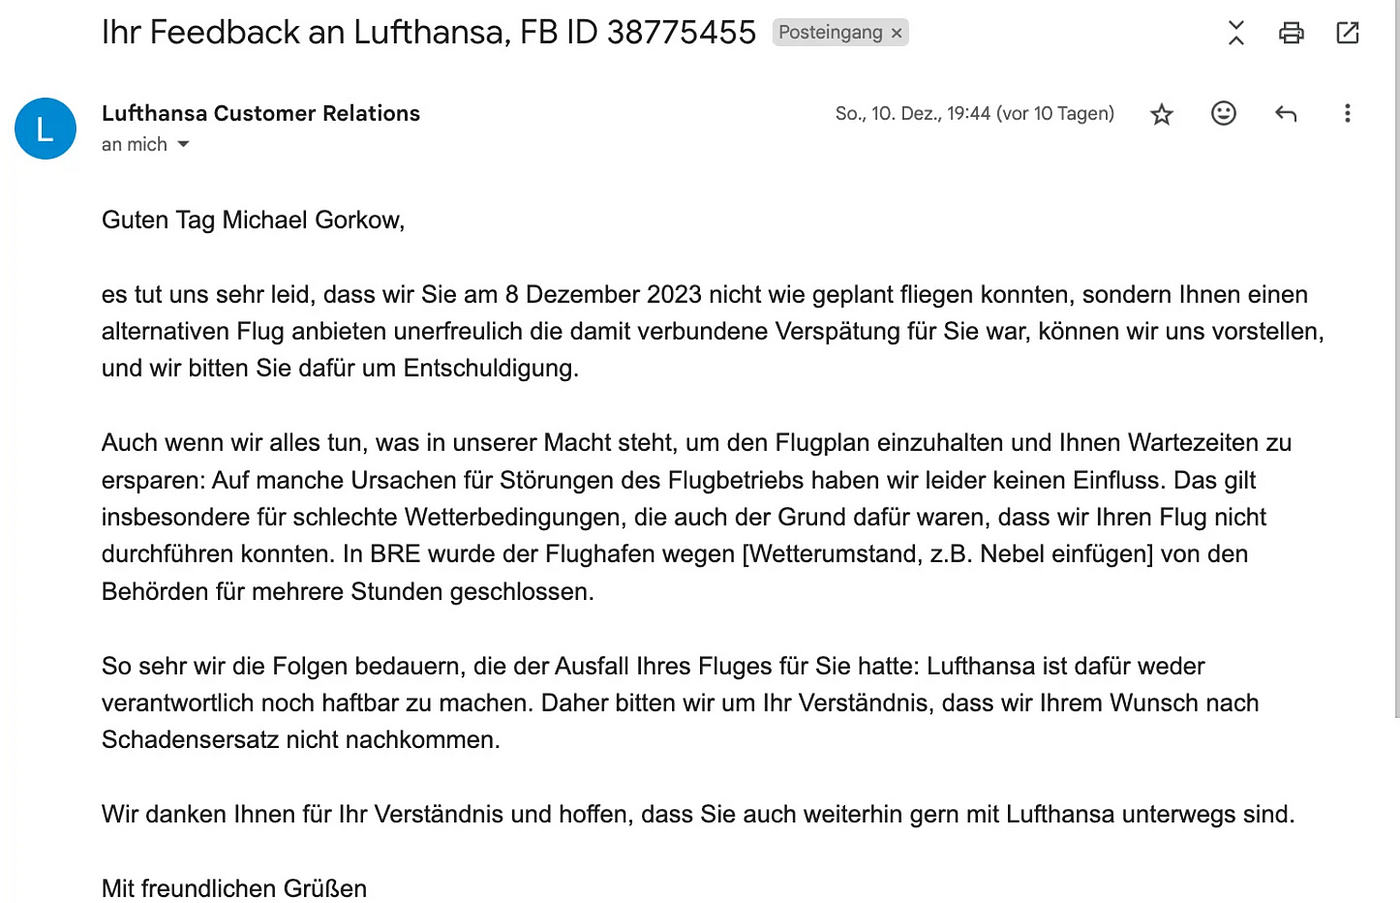 Lufthansa's embarrassing attempt to automate its customer service, how it  is worse than ChatGPT and my fight to be compensated according to EU  regulations, by Michael Gorkow, Dec, 2023